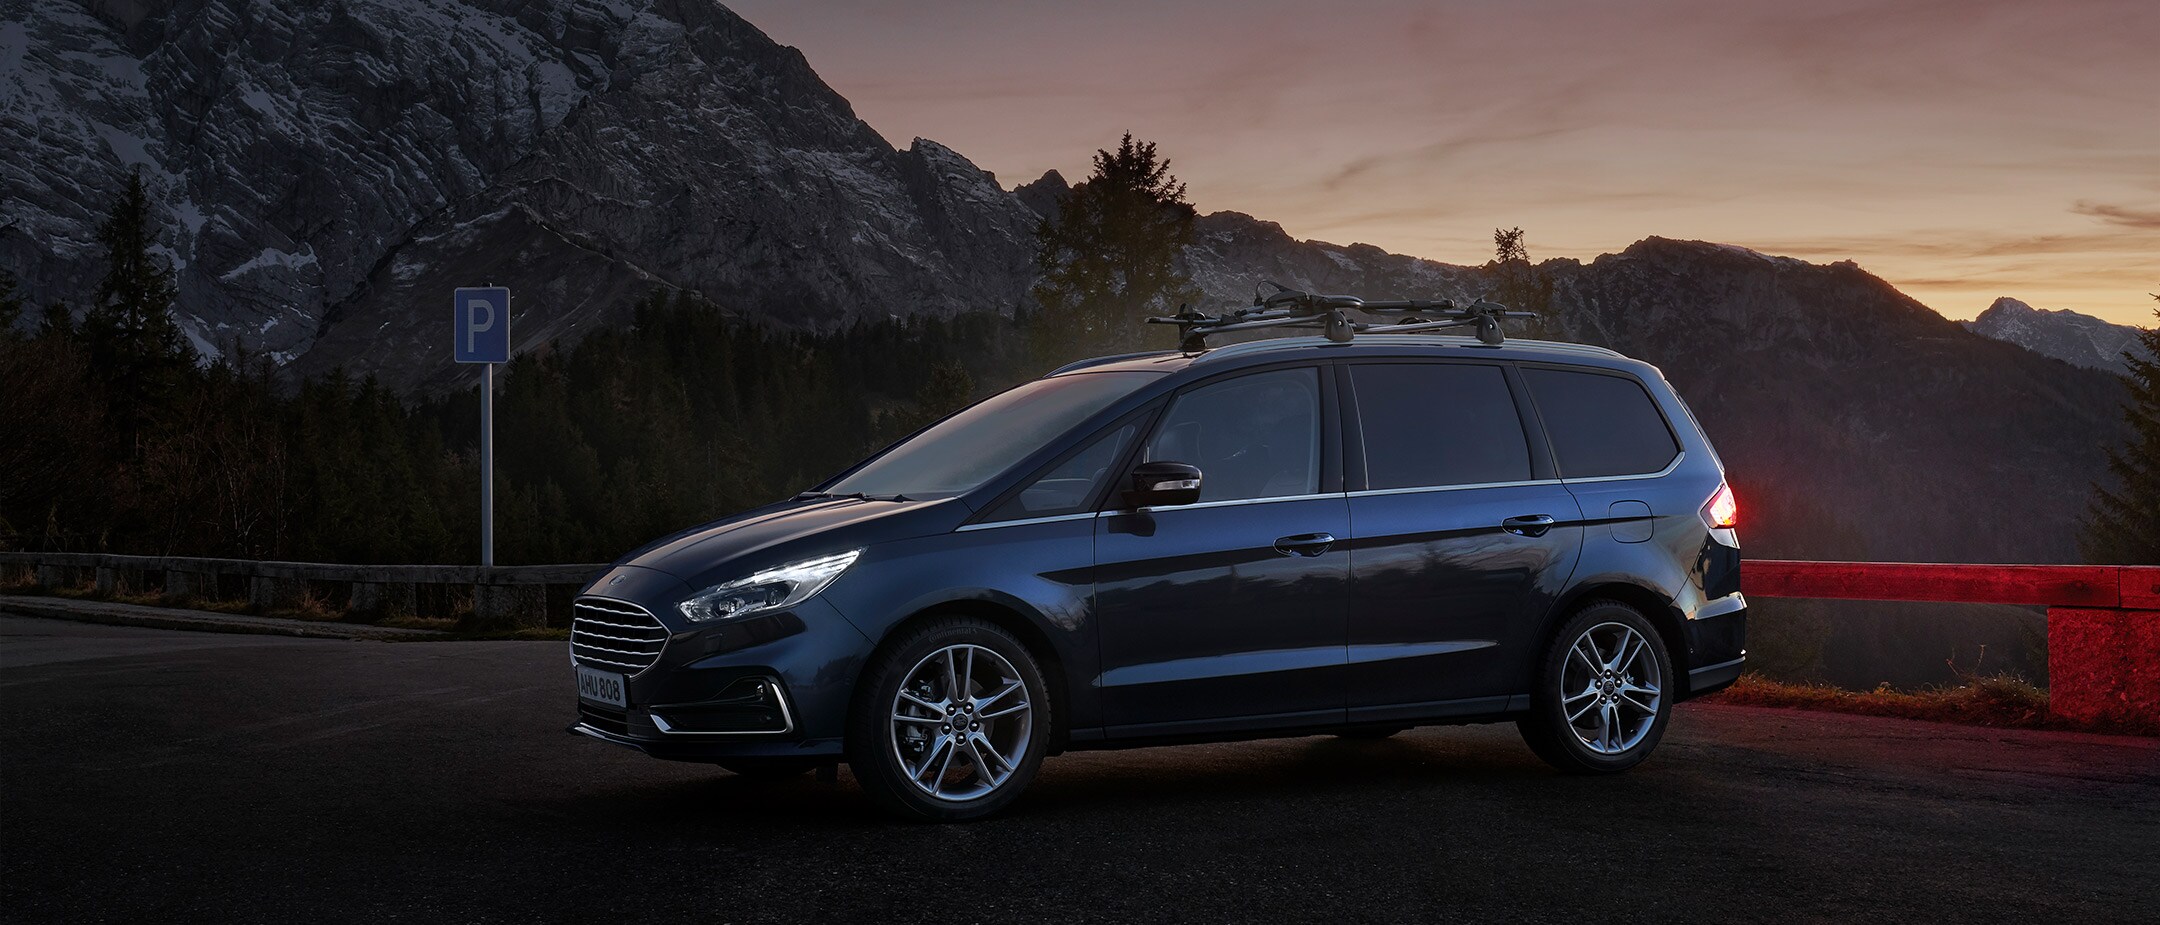 Ford Galaxy Titanium Hybrid side view at sunset